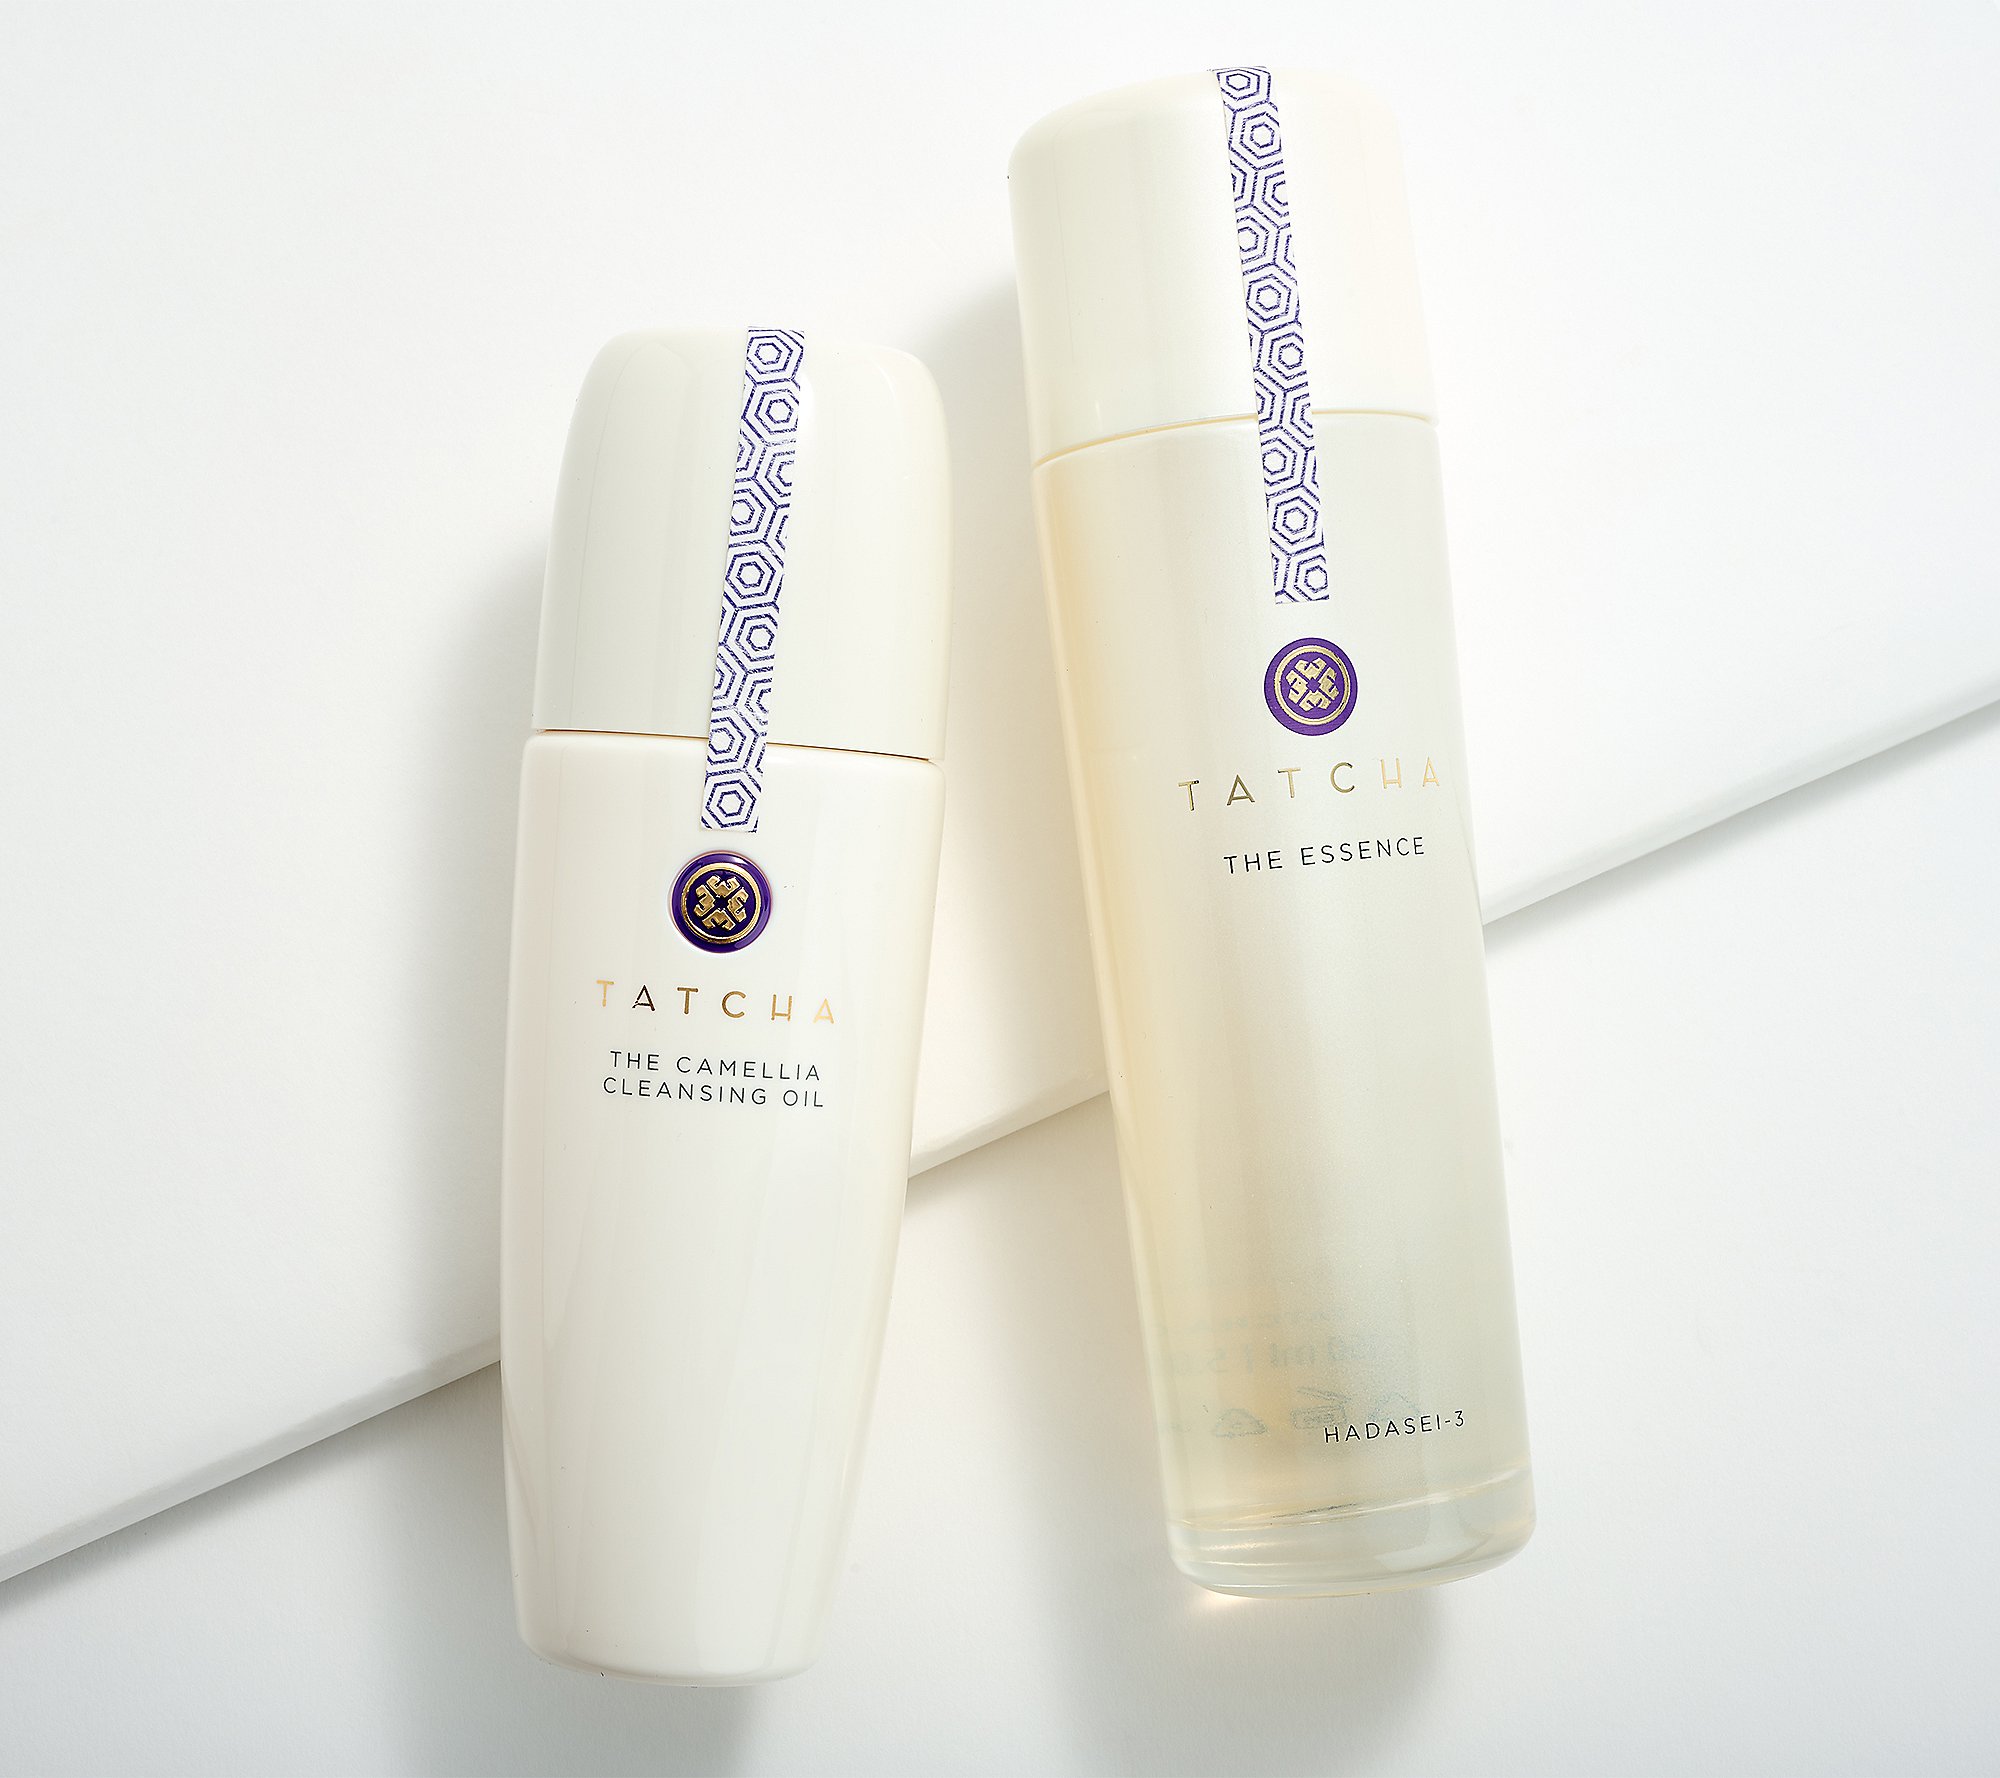 A-D TATCHA Essence & Cleansing Oil Auto-Delivery